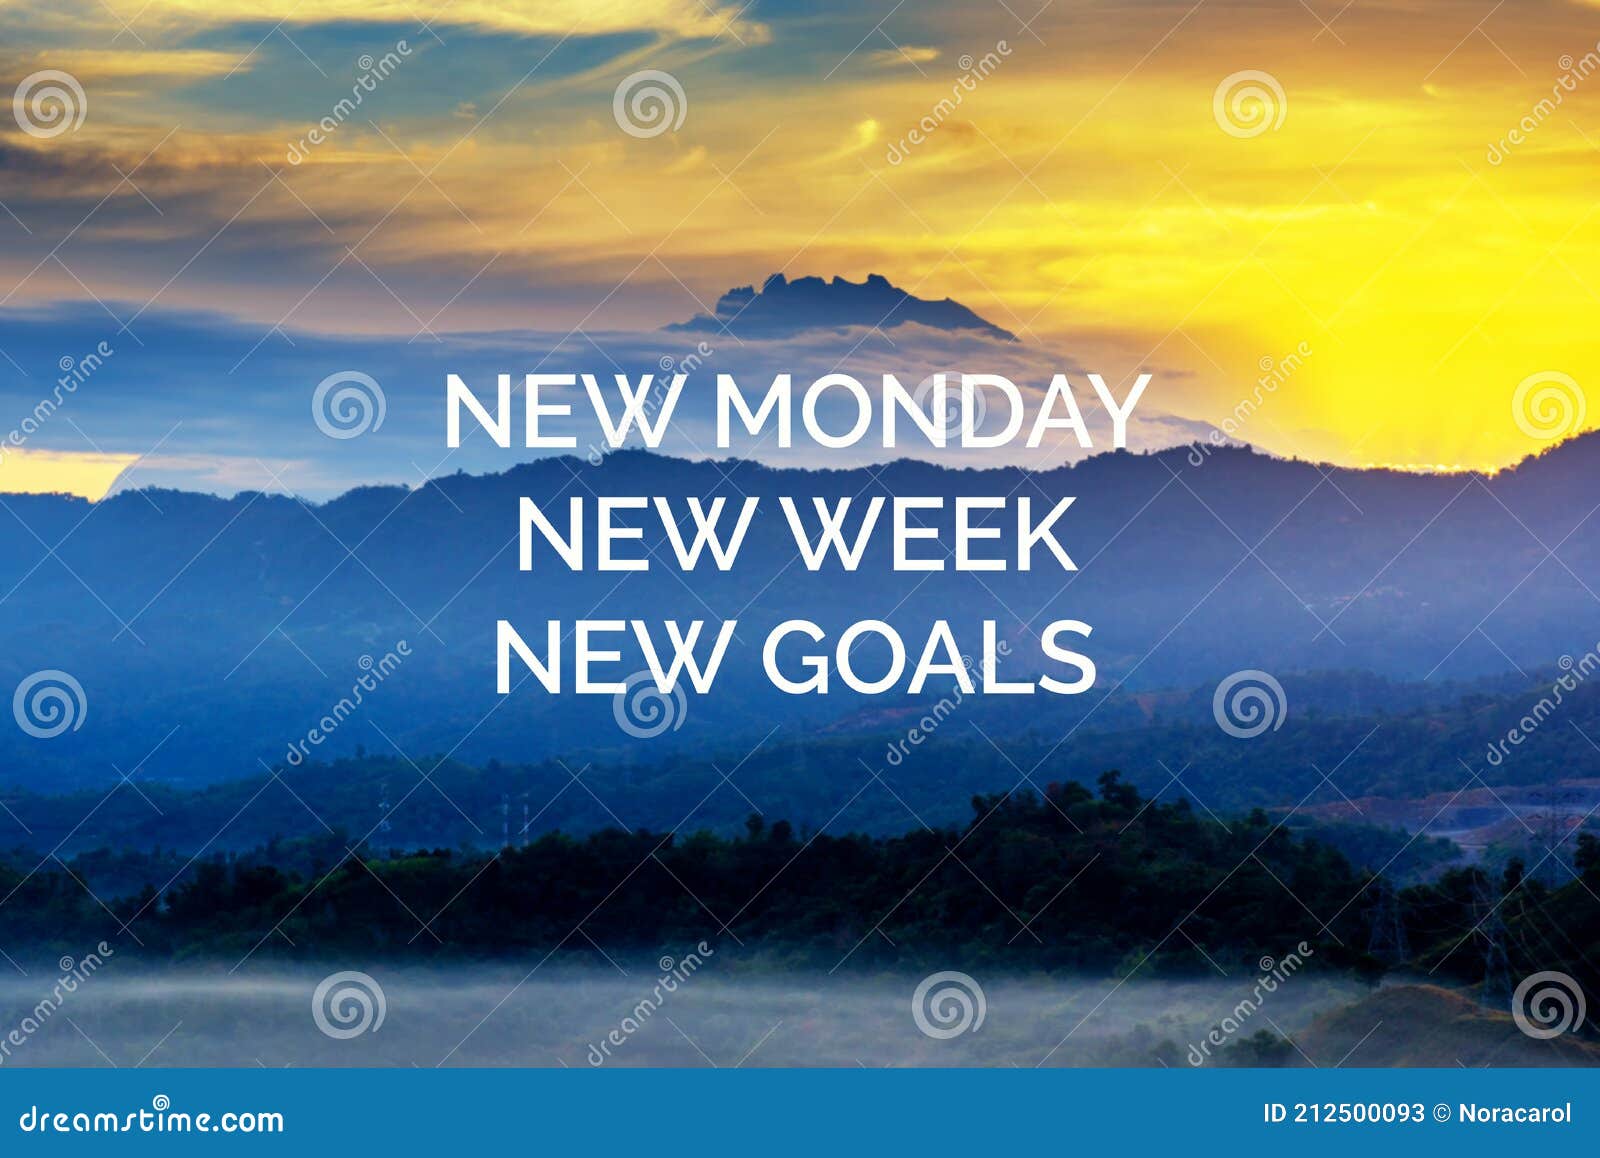 inspirational quotes - new monday, new week, new goals